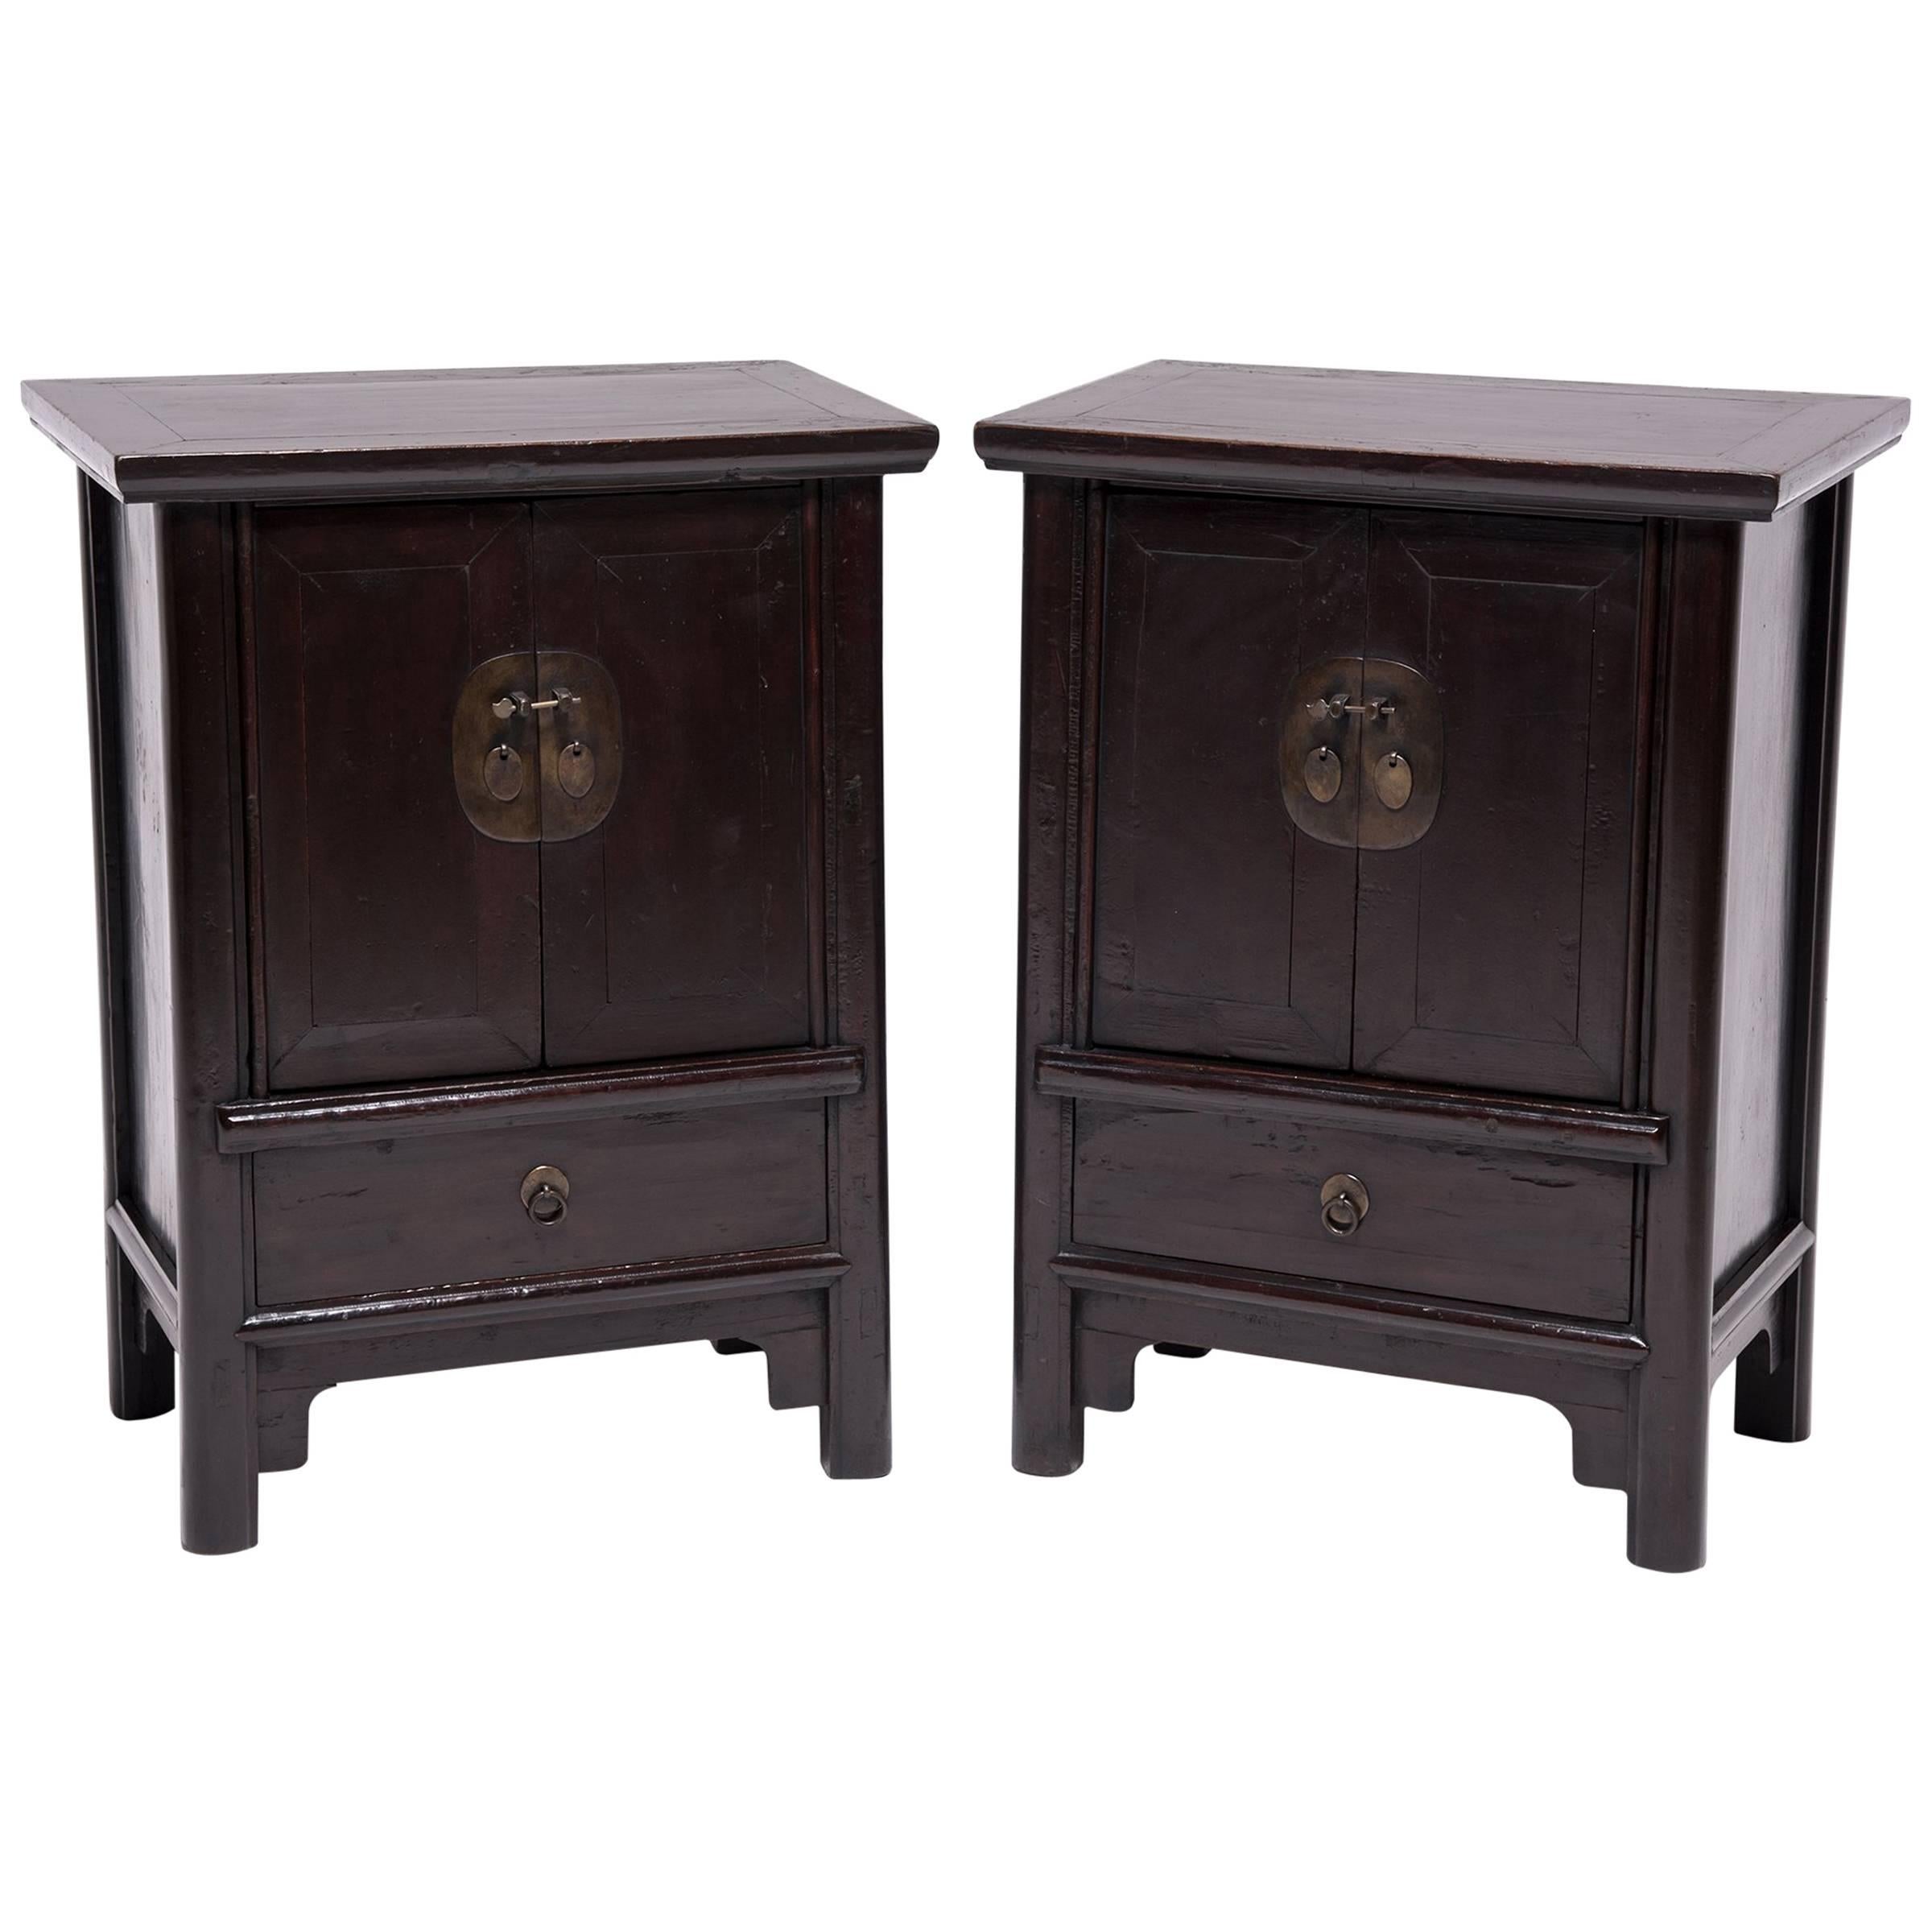 Pair of Chinese Inset Kang Cabinets